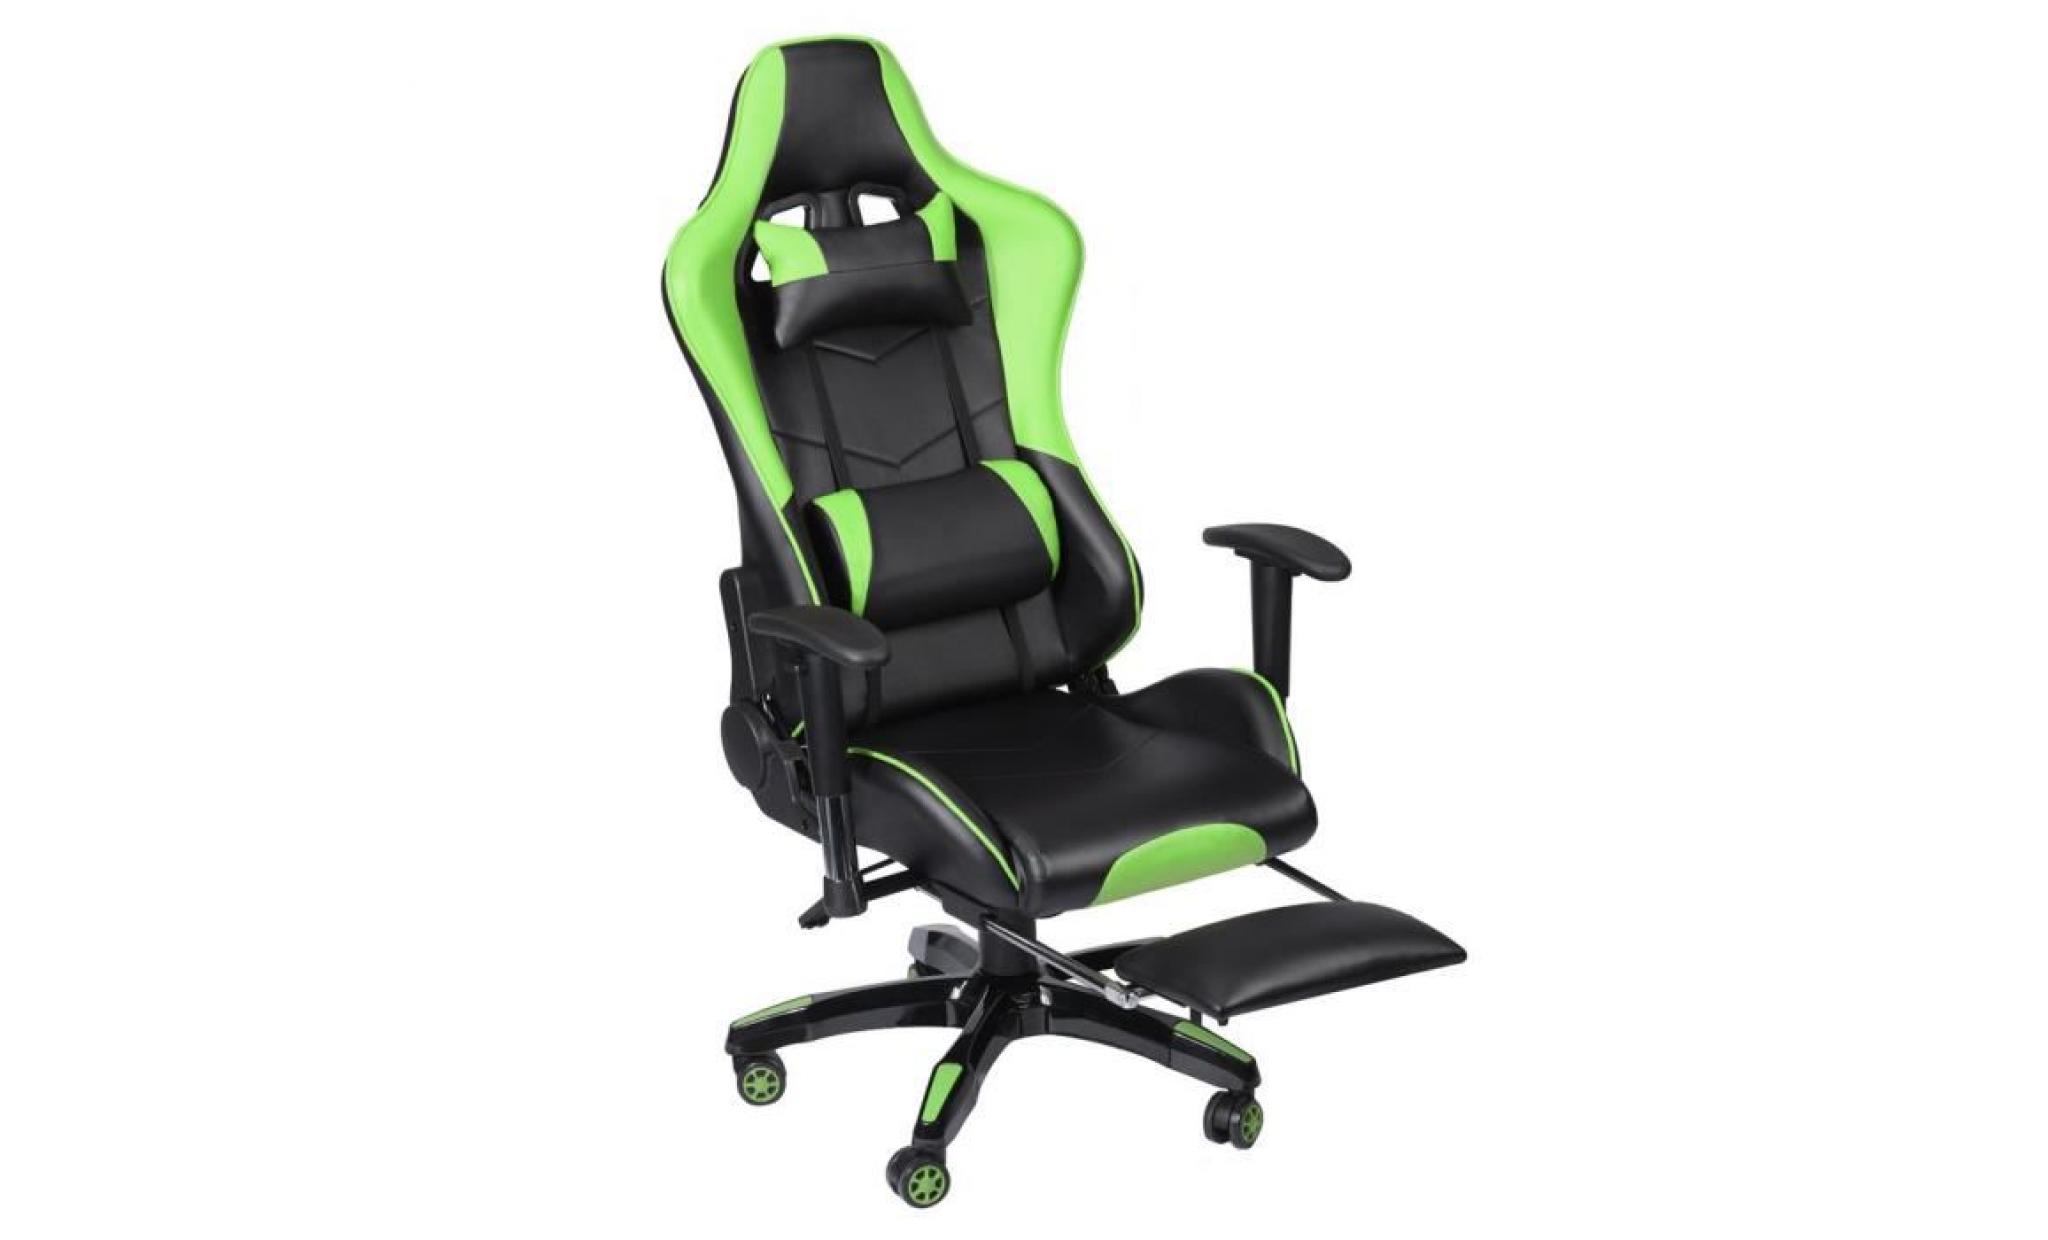 fauteuil gaming avec repose pied jeux video siege gaming 360 vert pas cher